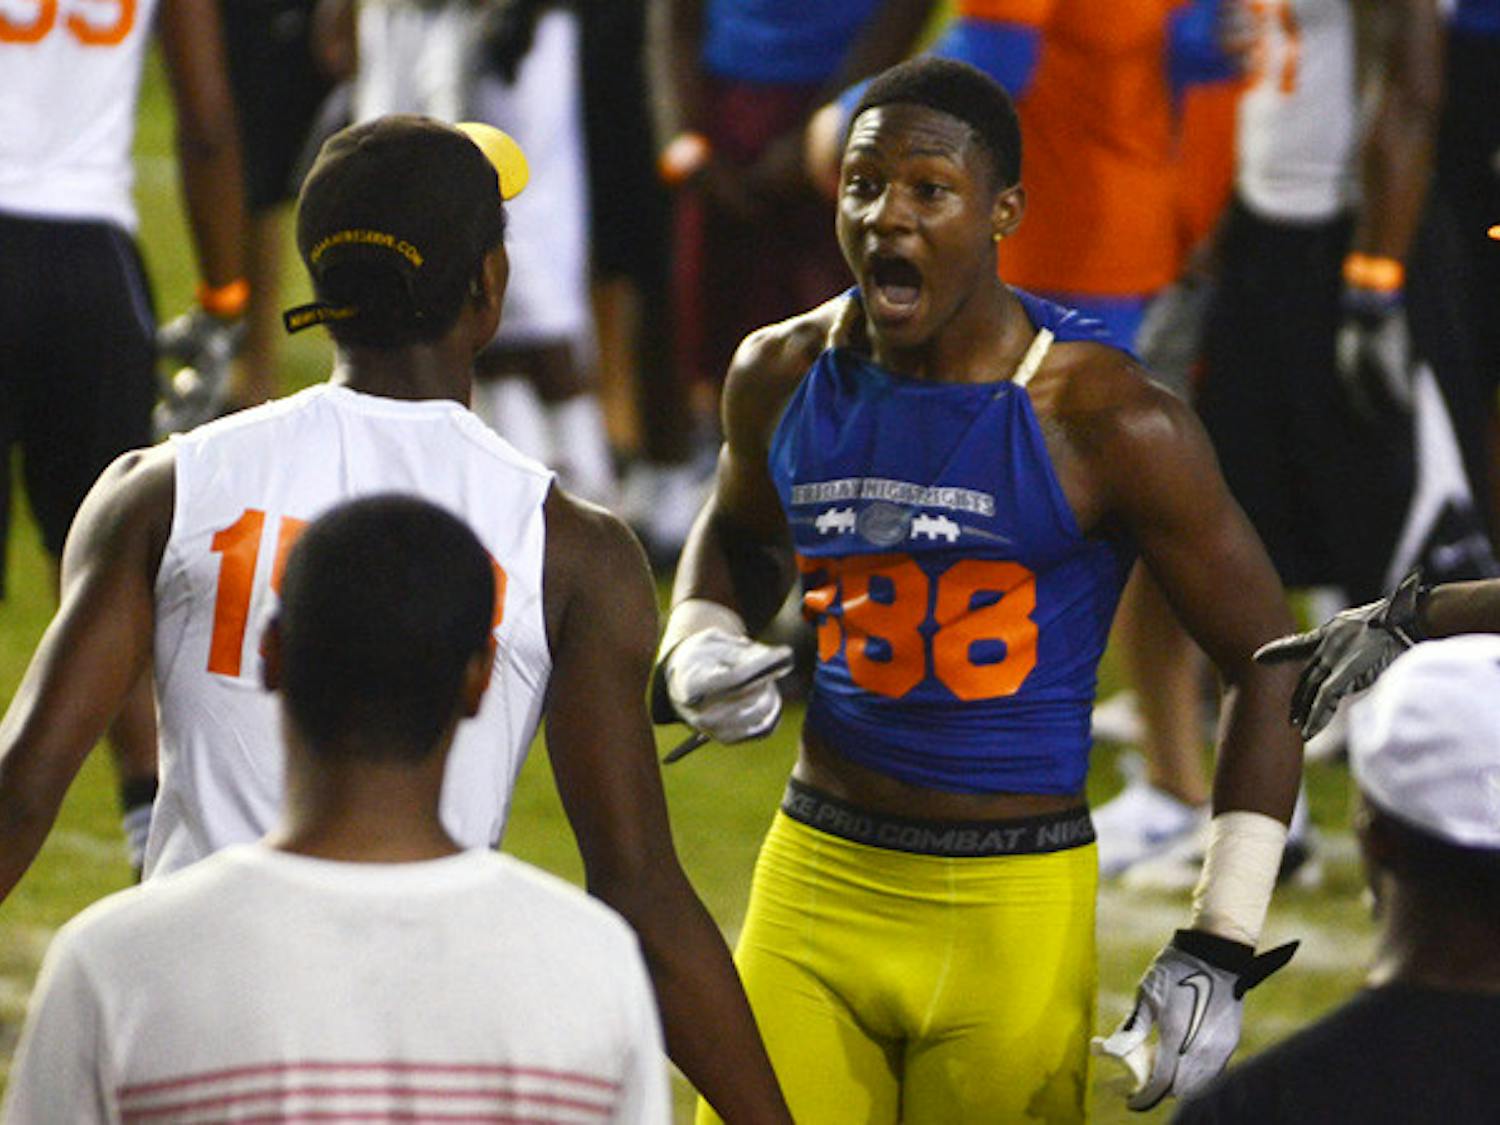 Stefon Diggs (right) steamrolled the competition at Florida’s Friday Night Lights. The five-star wideout flashed a Gator chomp after catching a TD on his first route.&nbsp;